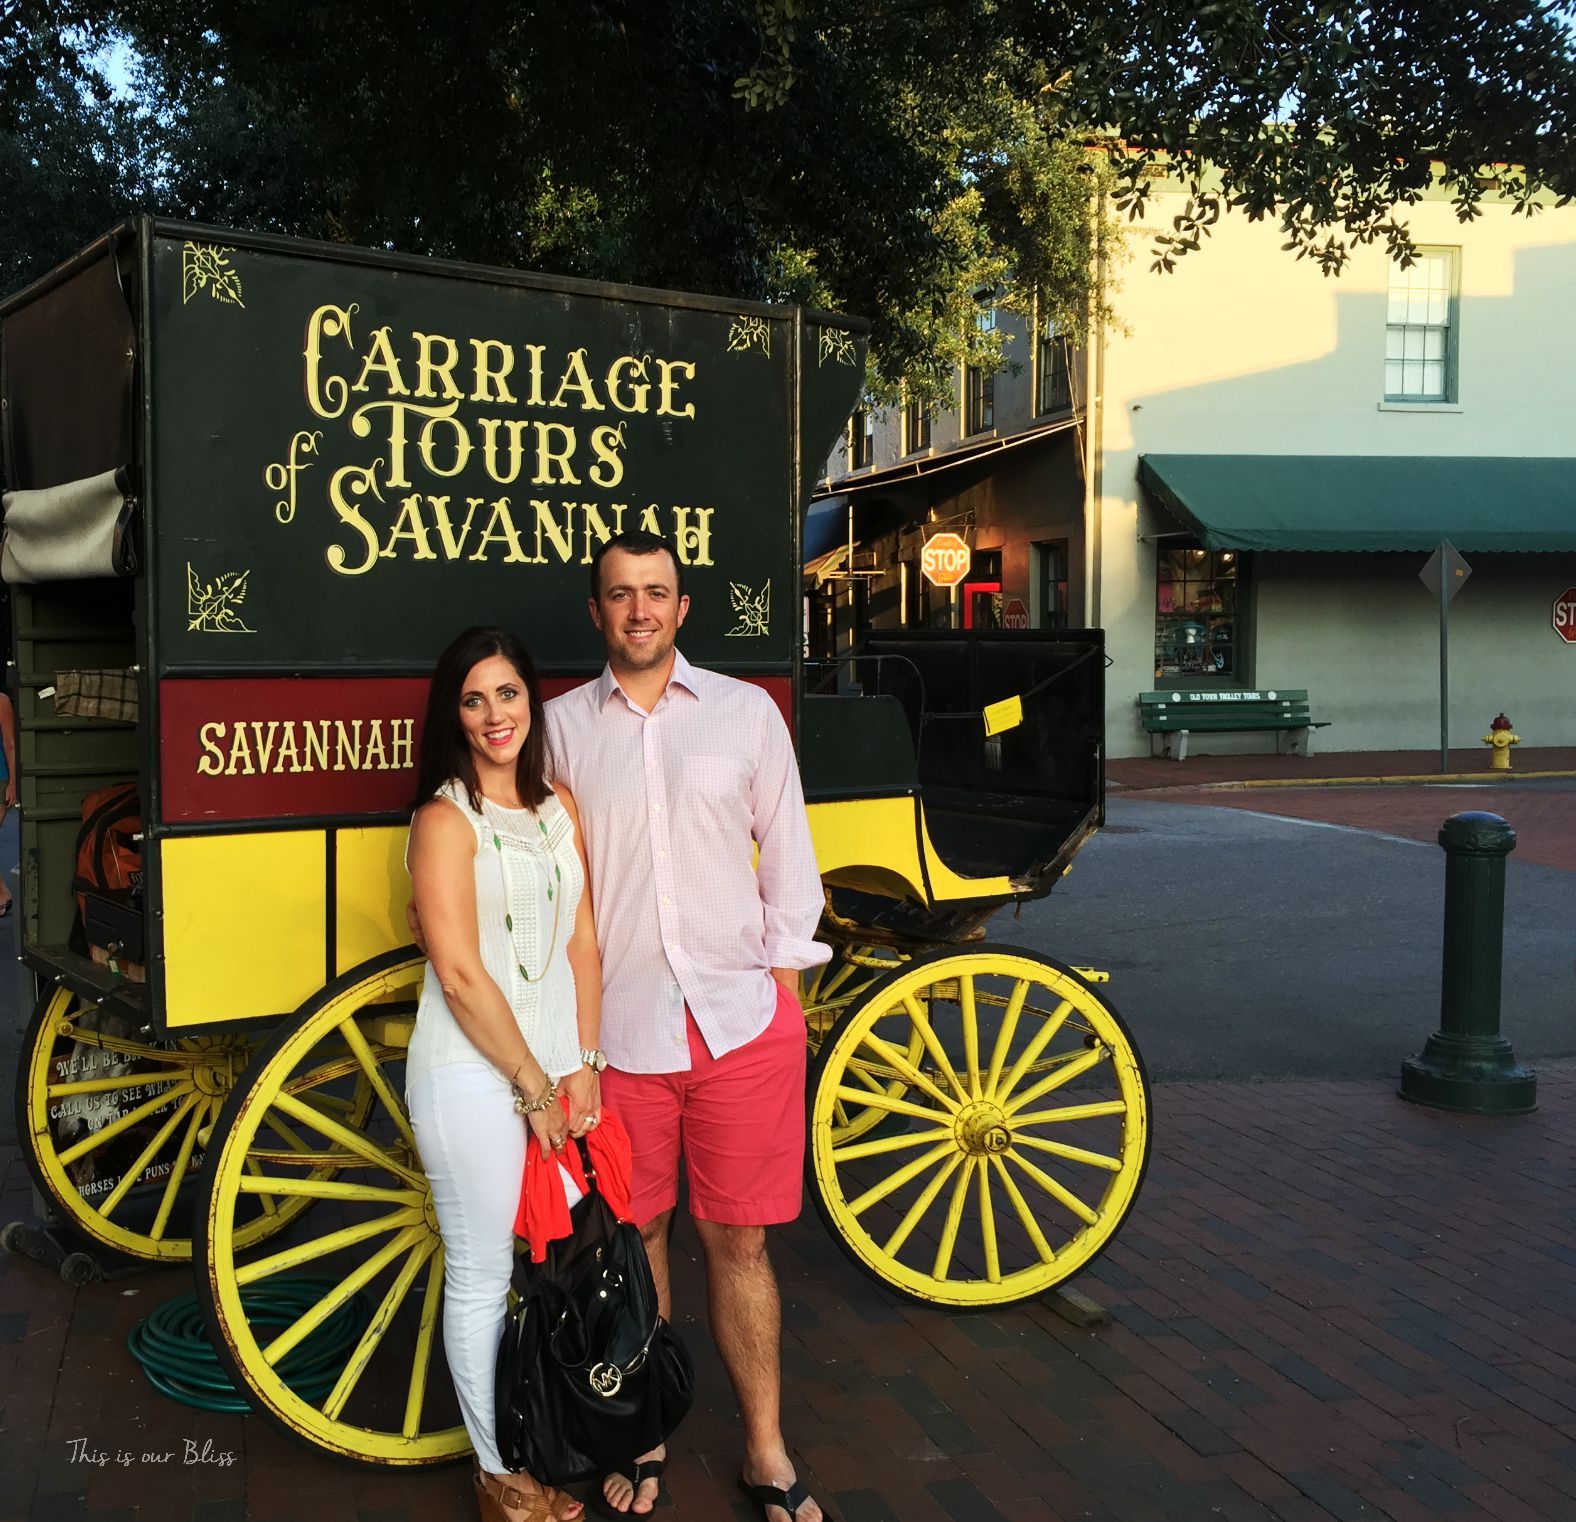 Carriage Tours of Savannah - sunset ride - This is our Bliss